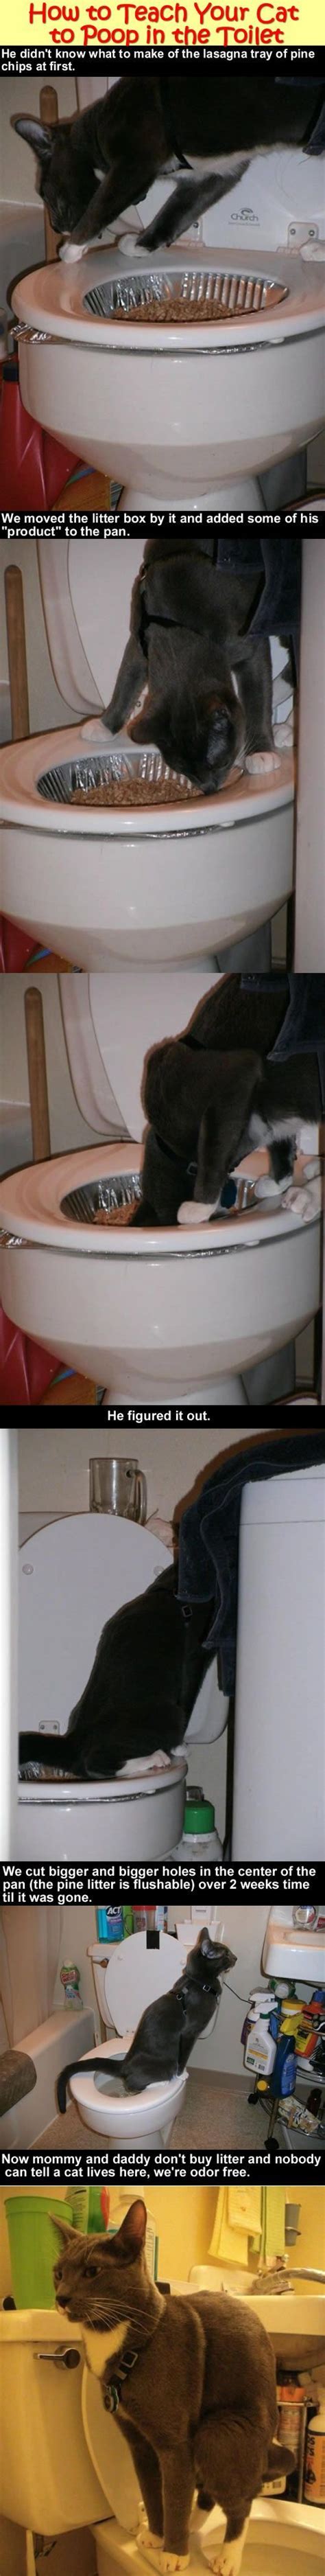 How To Toilet Train Your Cat Jeanne Foguths Blog